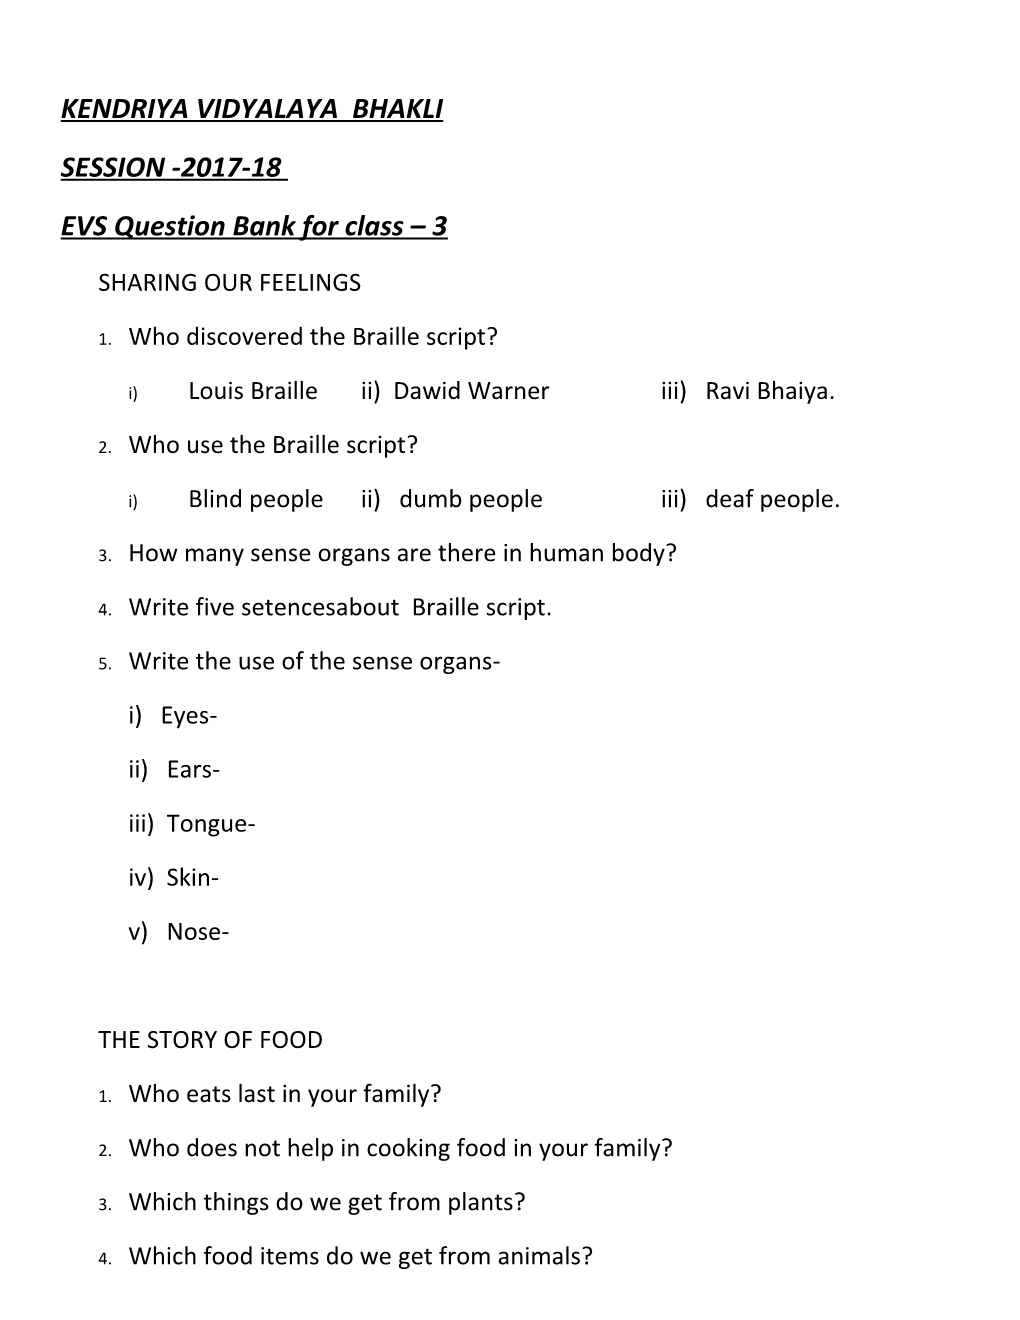 EVS Question Bank for Class 3